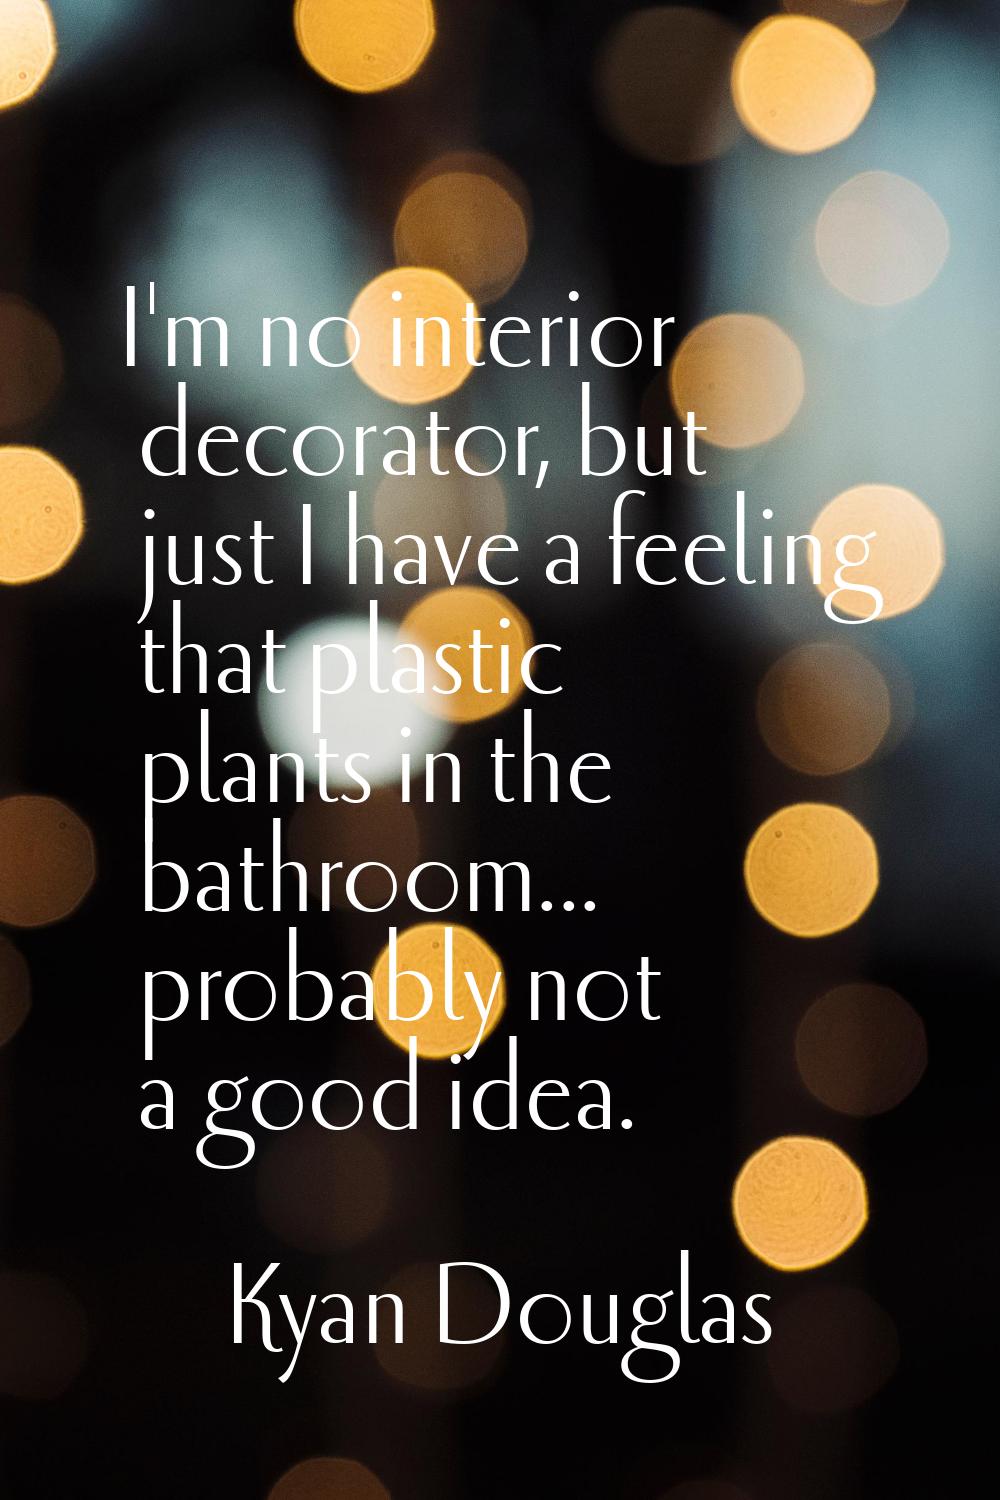 I'm no interior decorator, but just I have a feeling that plastic plants in the bathroom... probabl